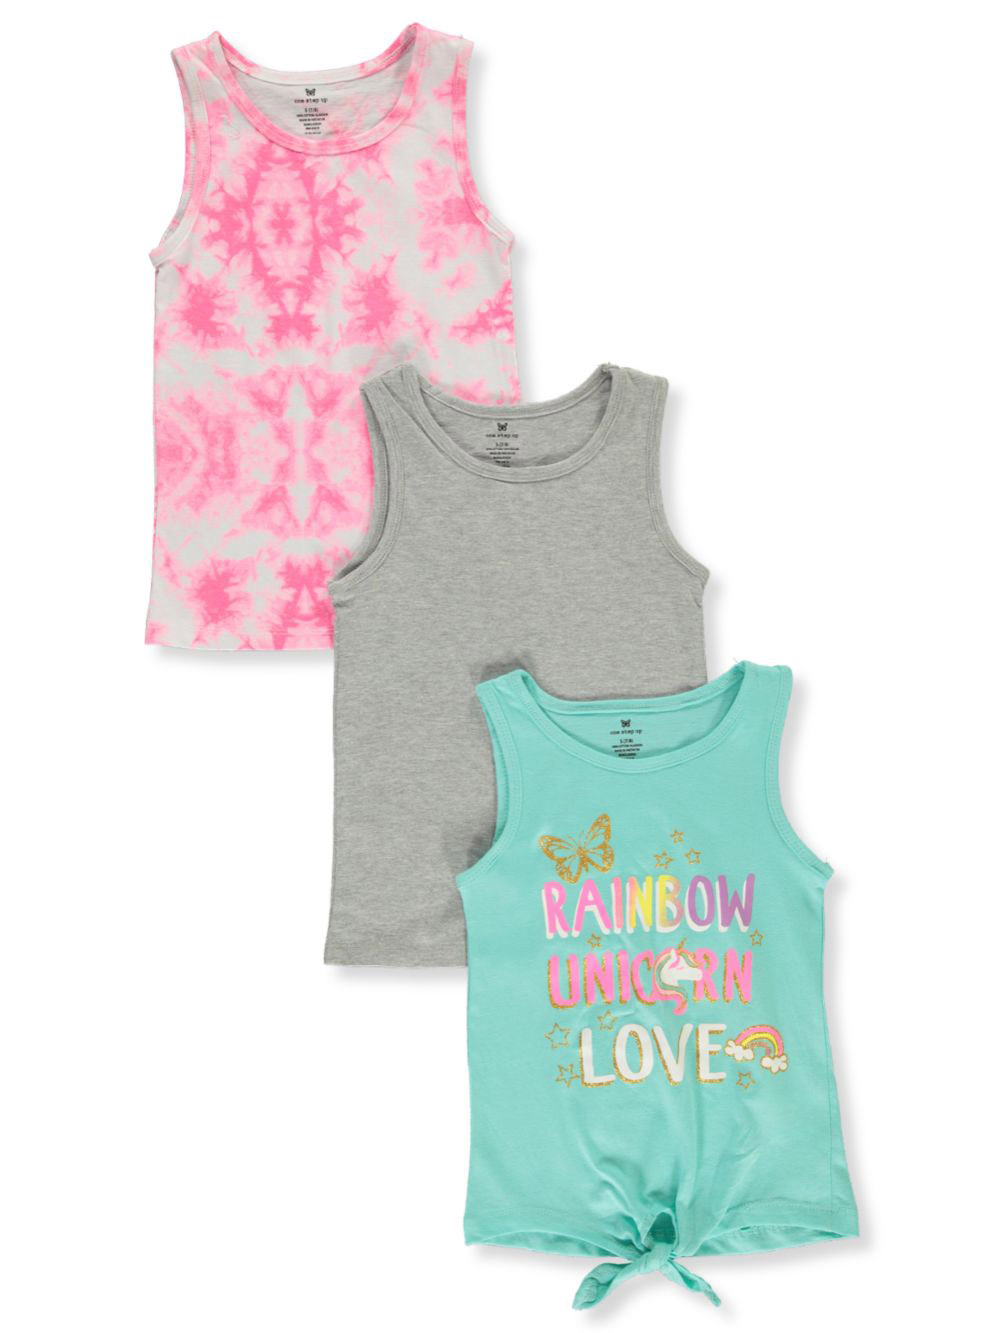 Size 10-12 Tank Tops for Girls